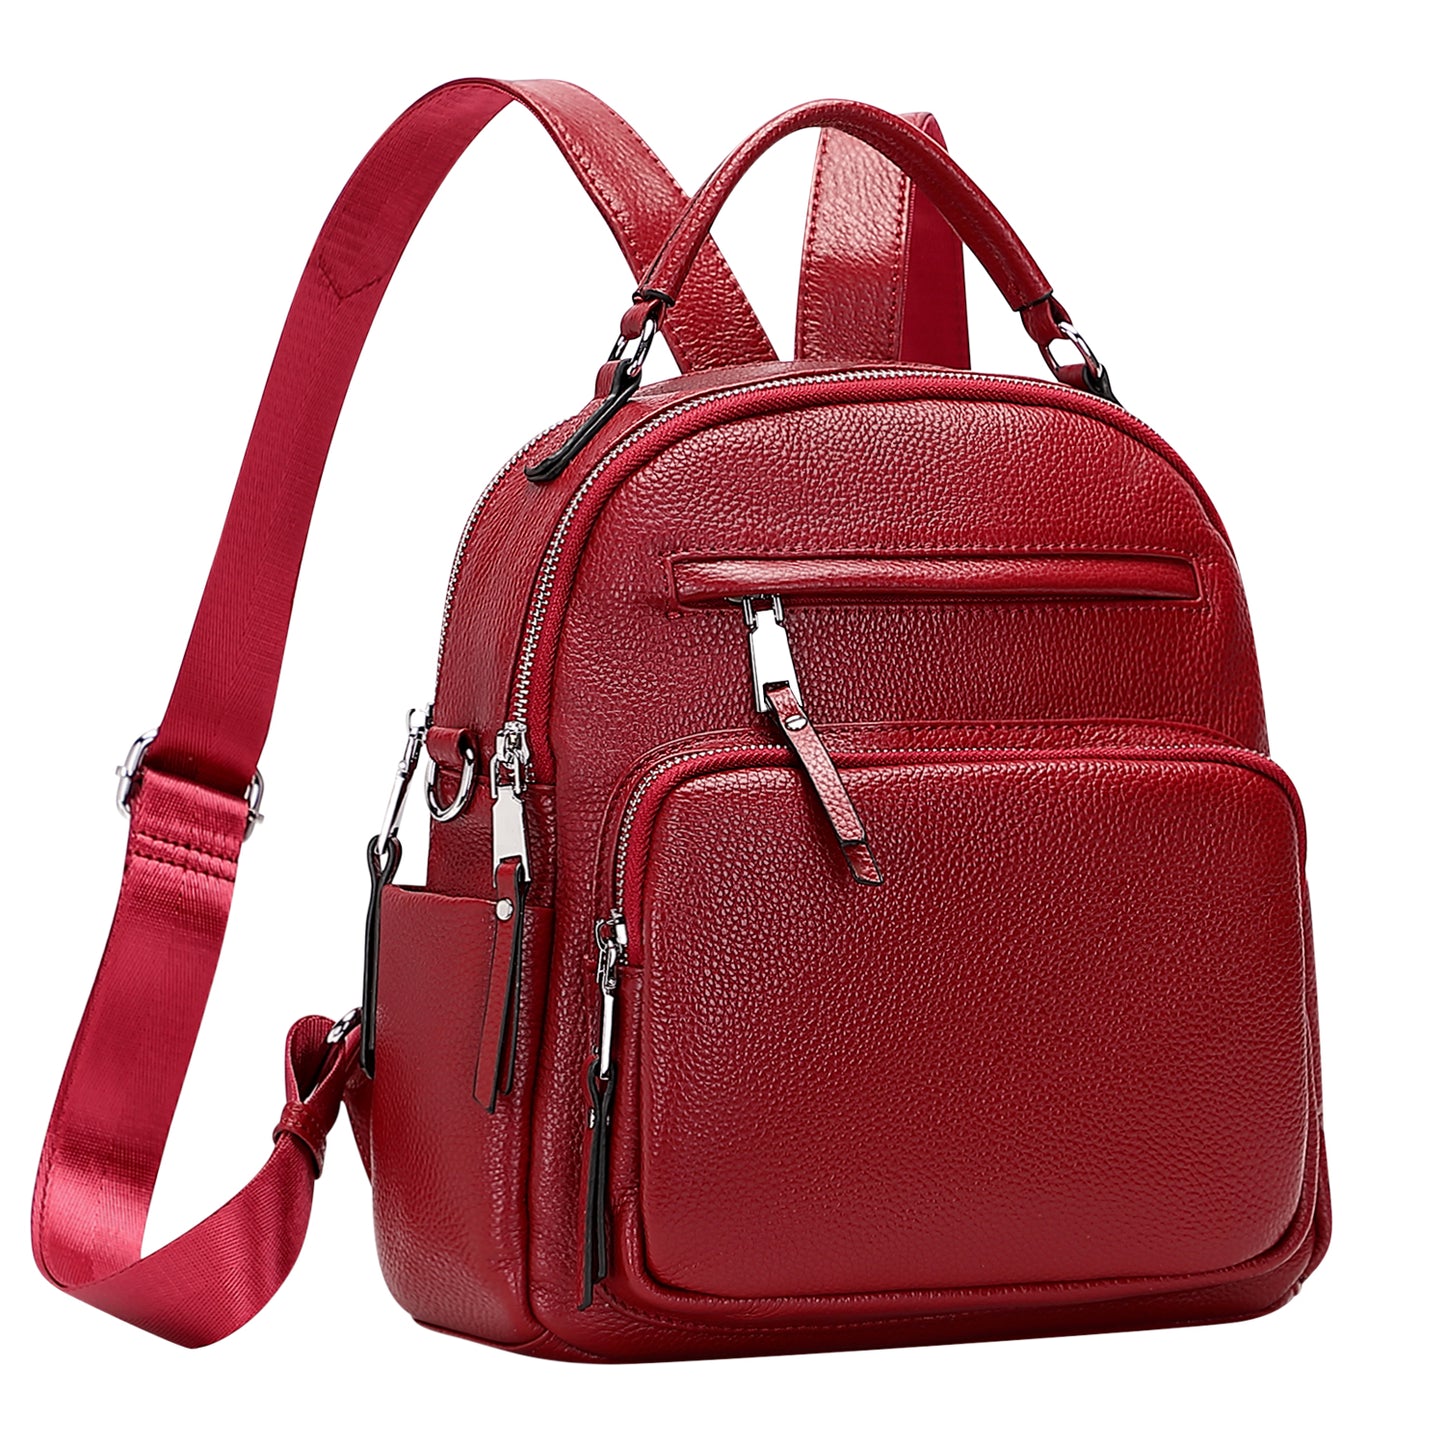 ALTOSY Small Leather Backpack Purse